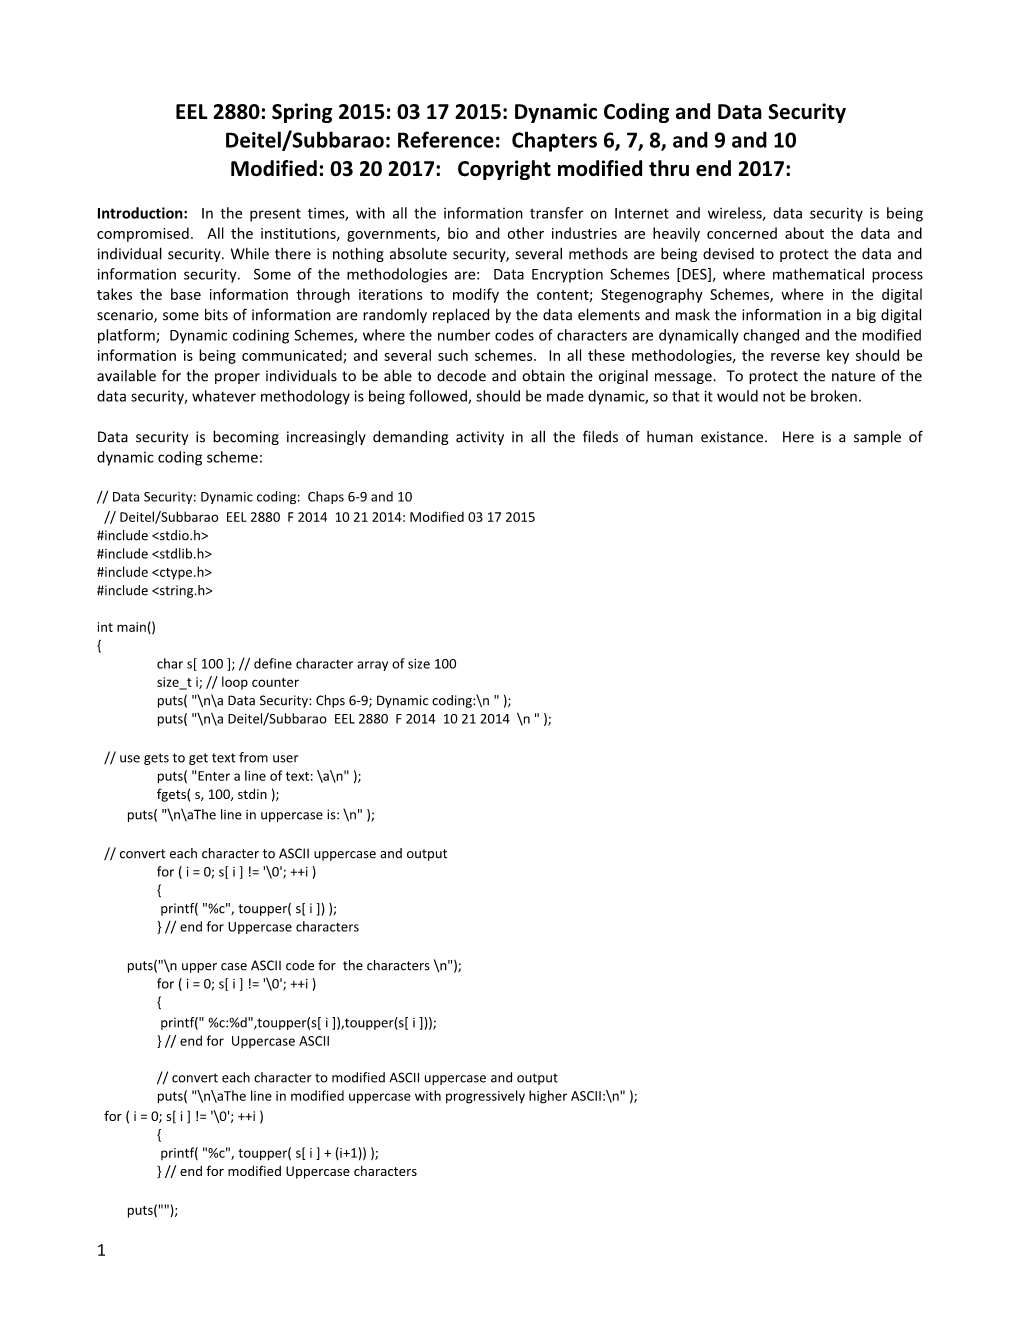 EEL 2880: Spring 2015: 03 17 2015: Dynamic Coding and Data Security